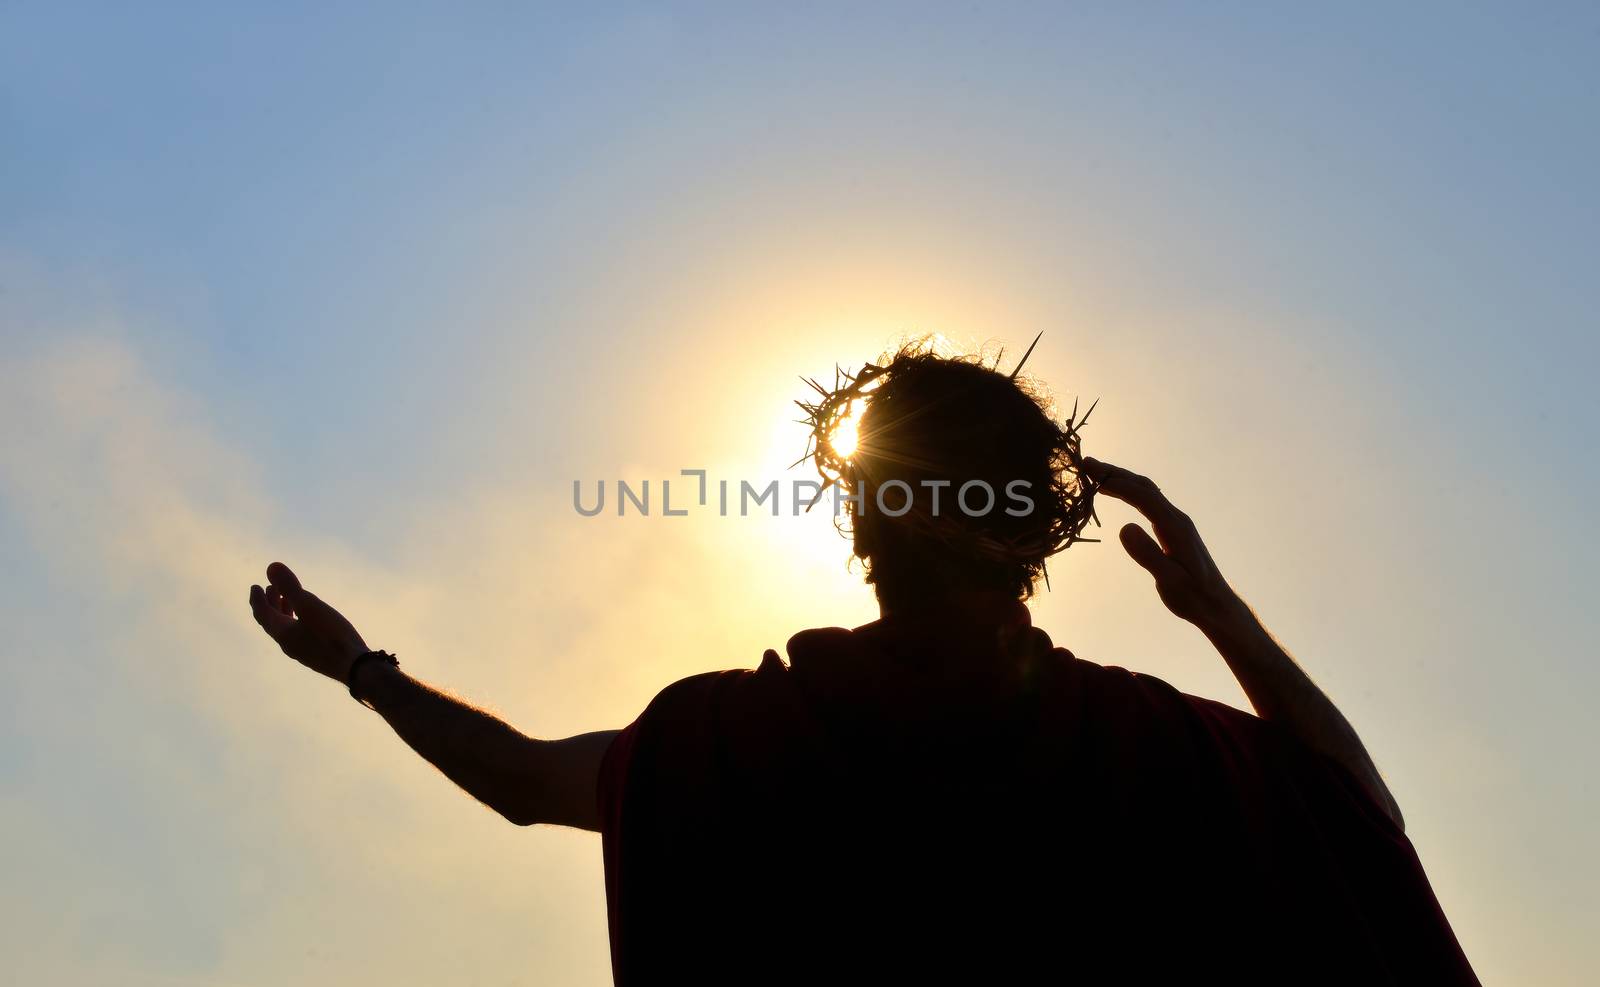 Jesus Christ with crown of thorns against the sun